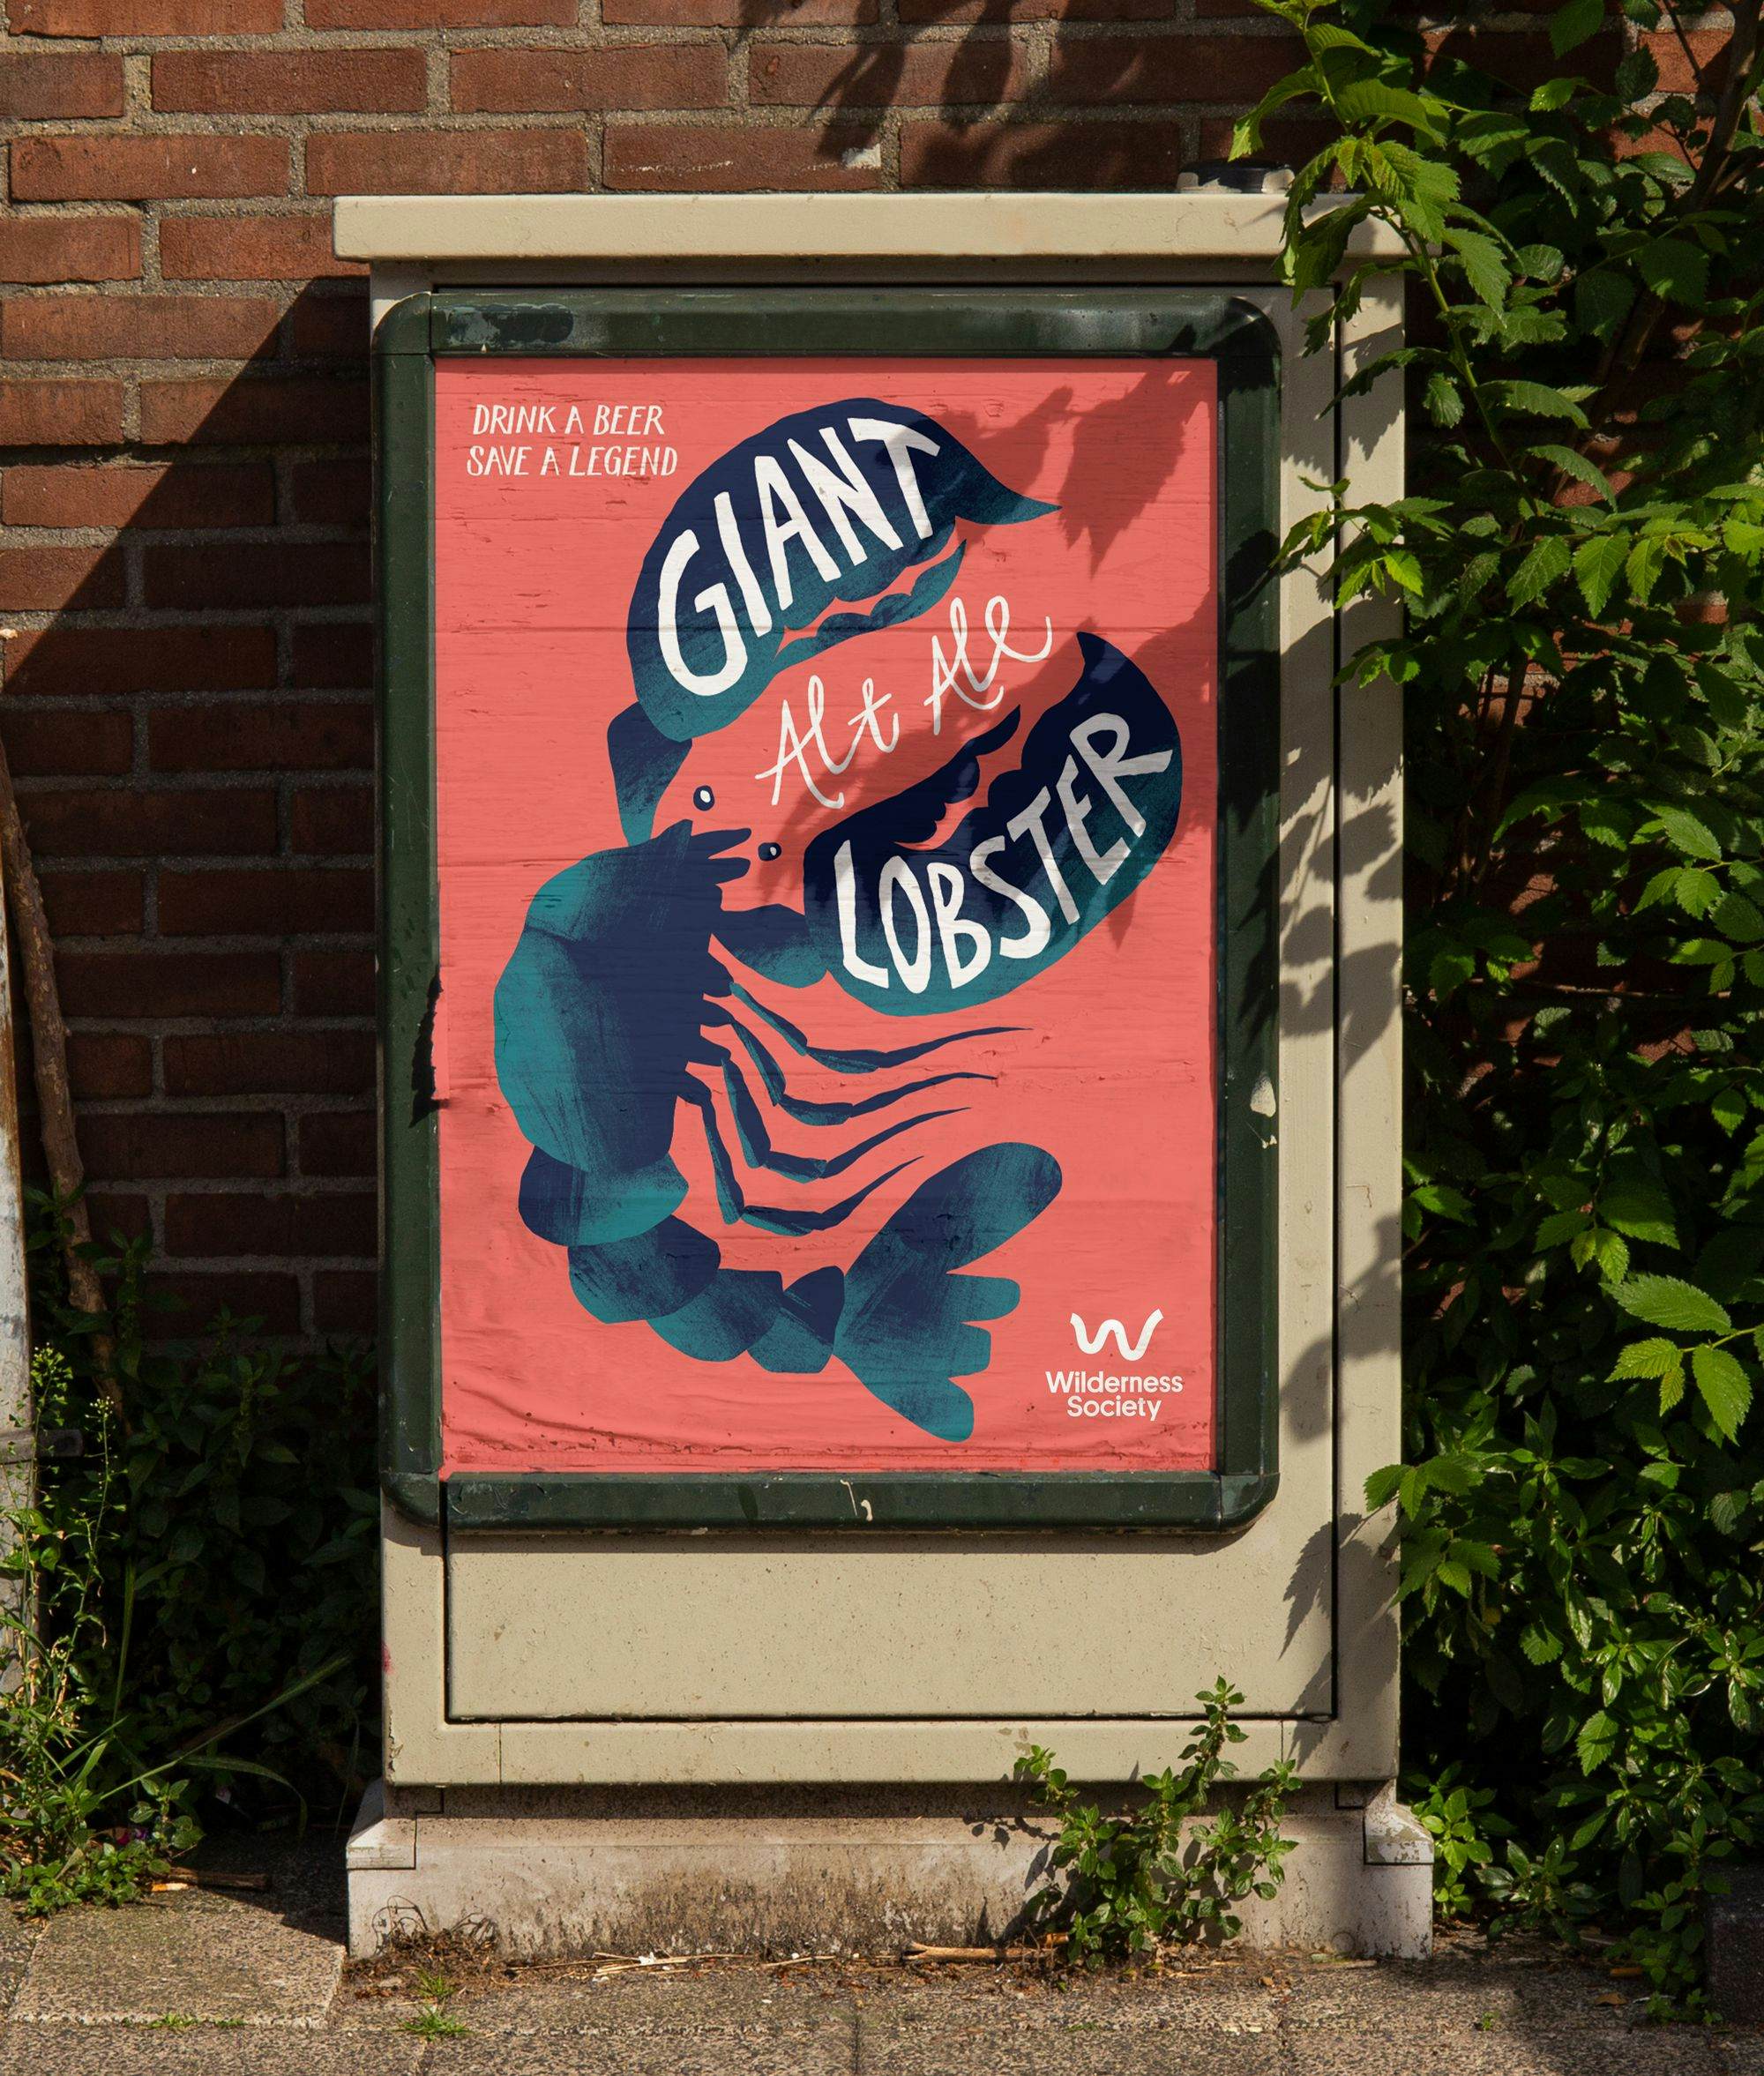 Giant Lobster Beer Wilderness Society by Alter